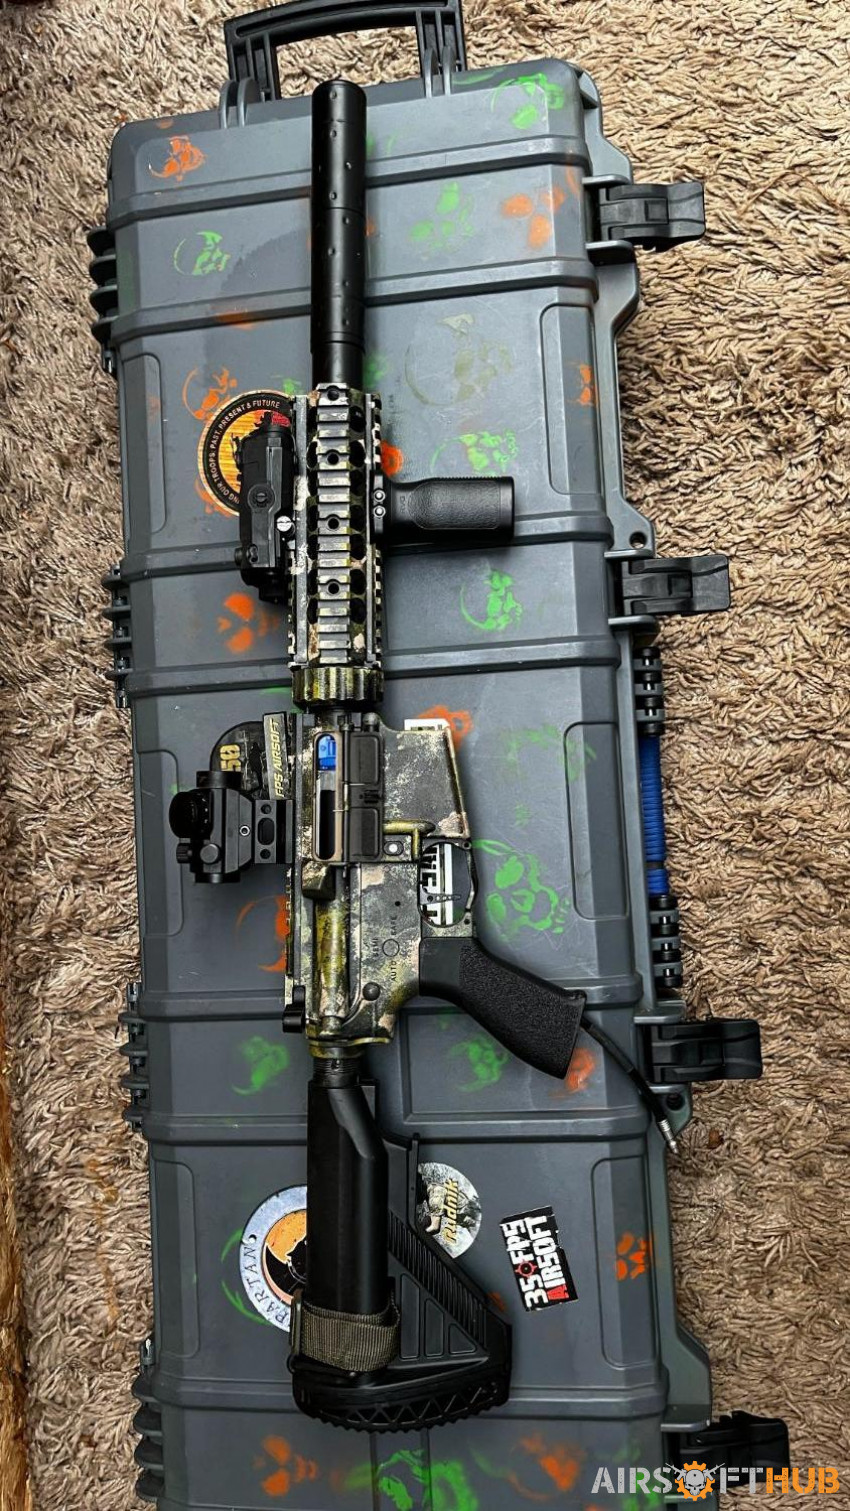 Hpa g&g cm16 - Used airsoft equipment